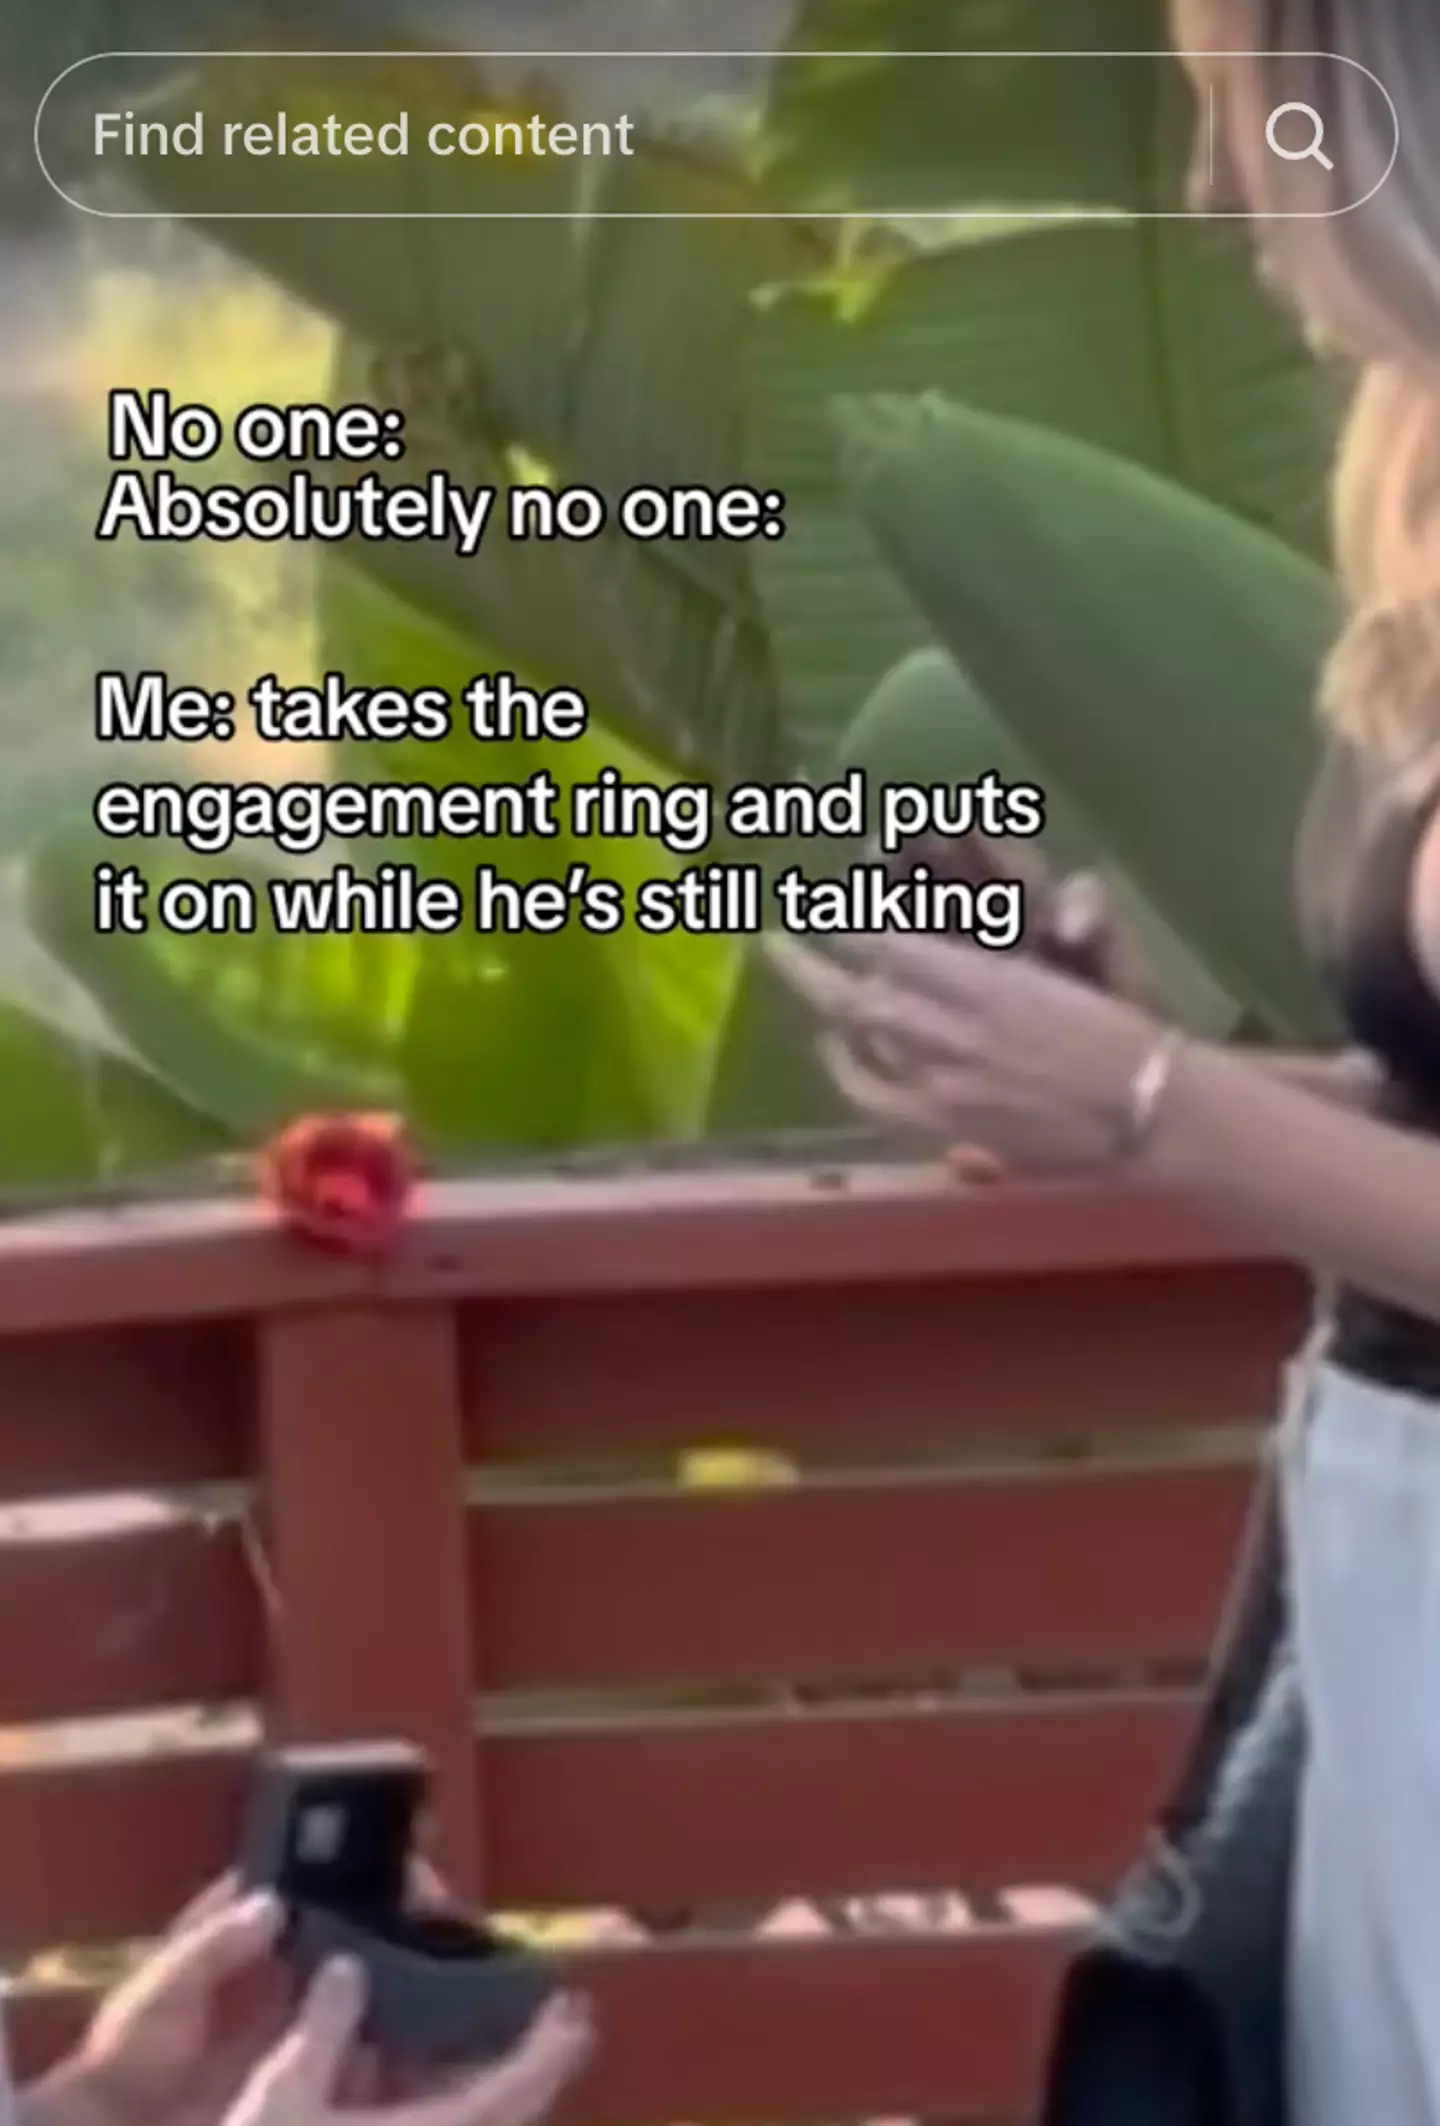 She then placed it on her finger too.